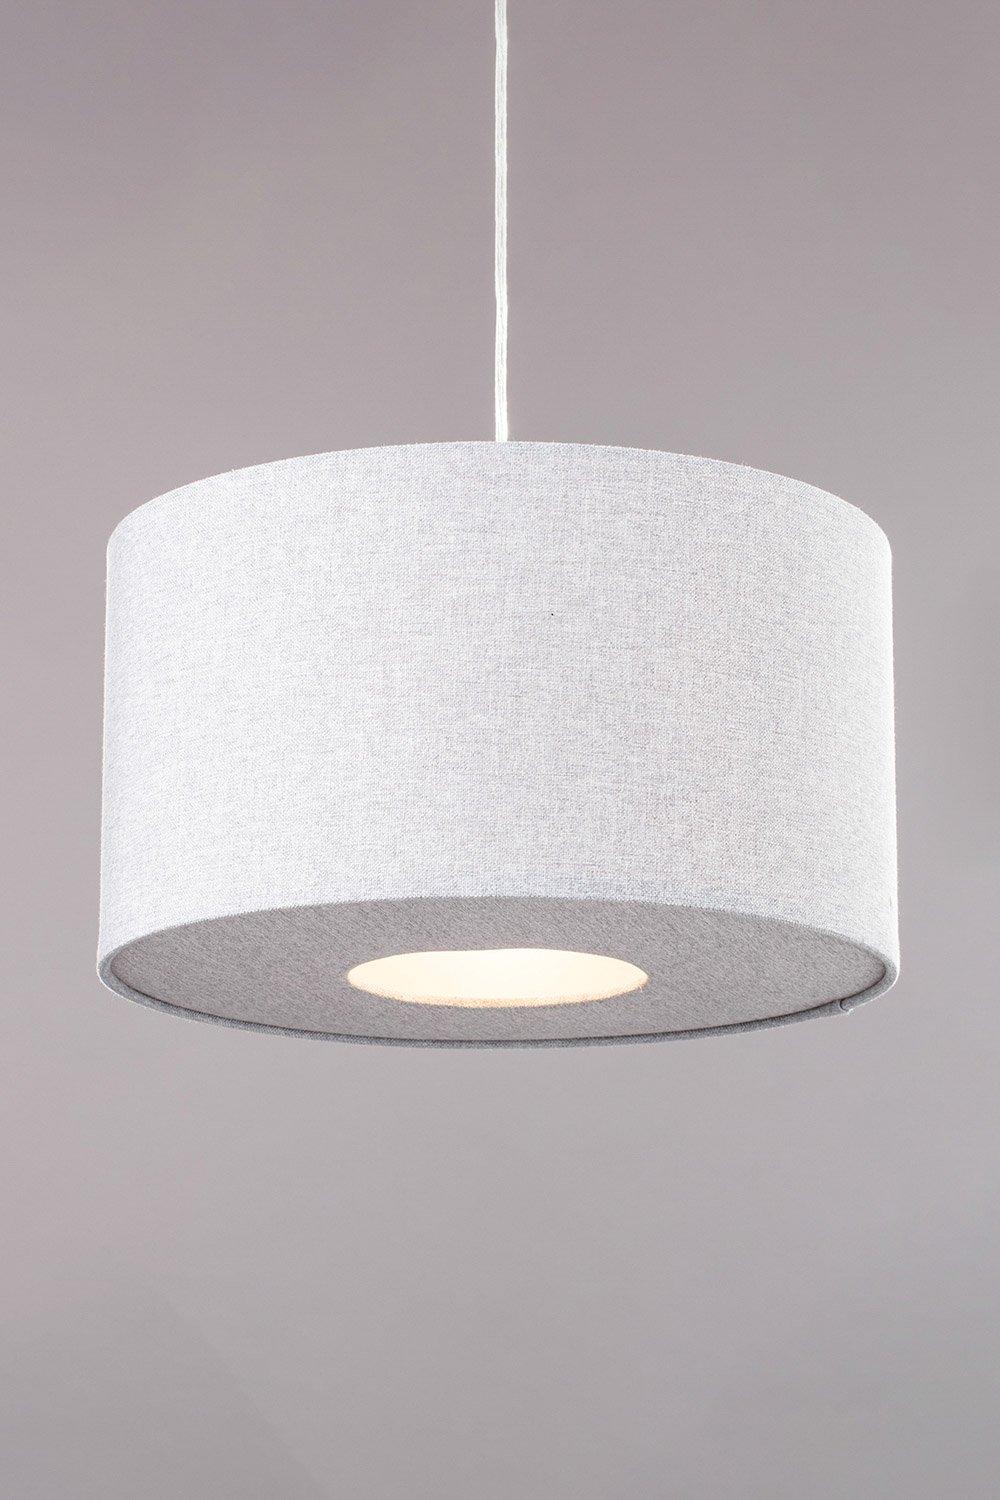 BHS Lighting Marle Easy Fit Light Shade|grey